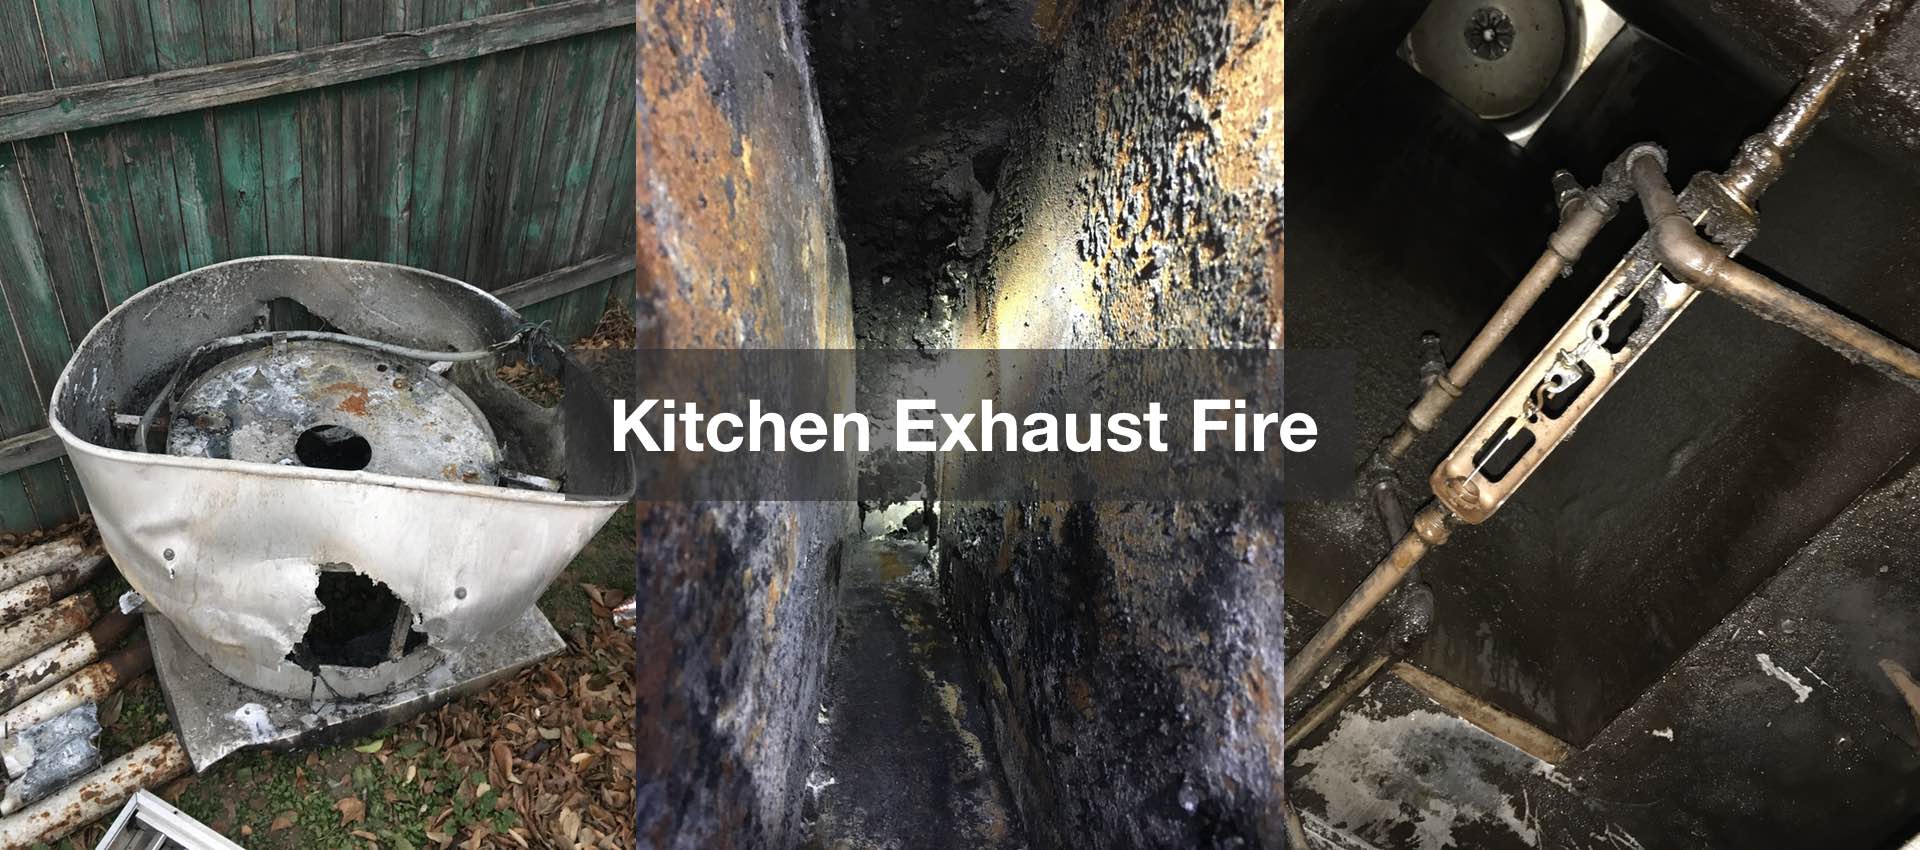 What Happens When a Fire Erupts in a Kitchen Exhaust System (Photos)